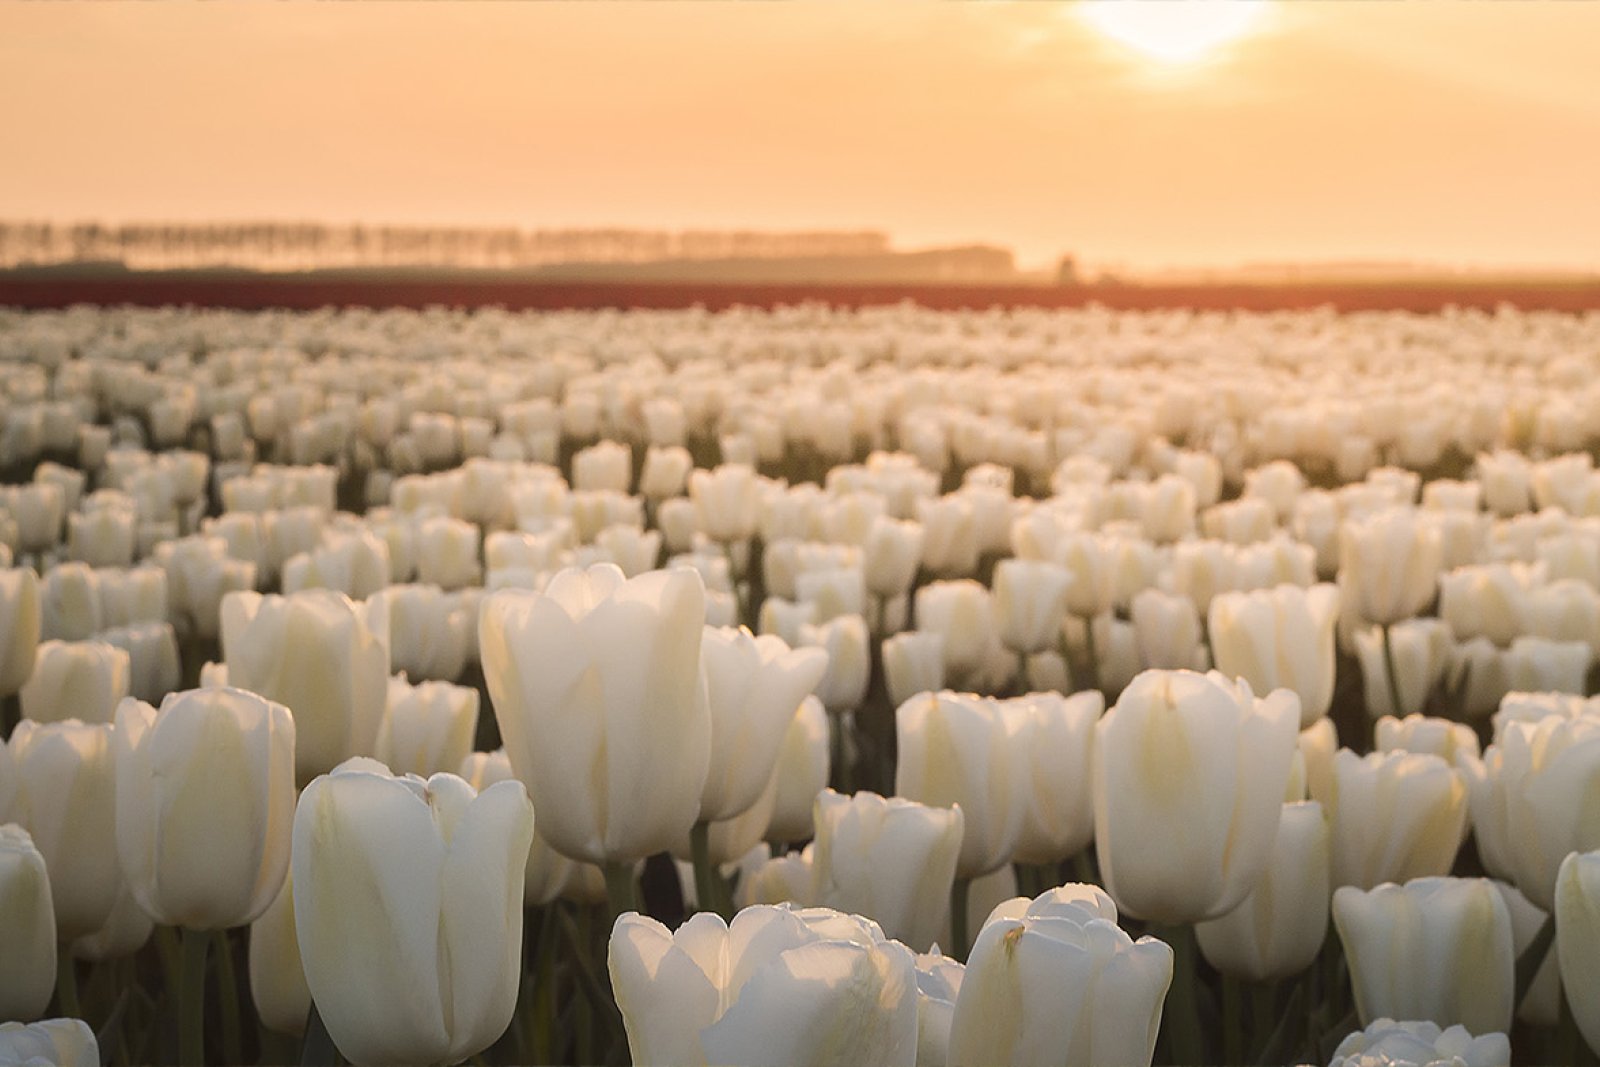 Tulip field with only white tulips